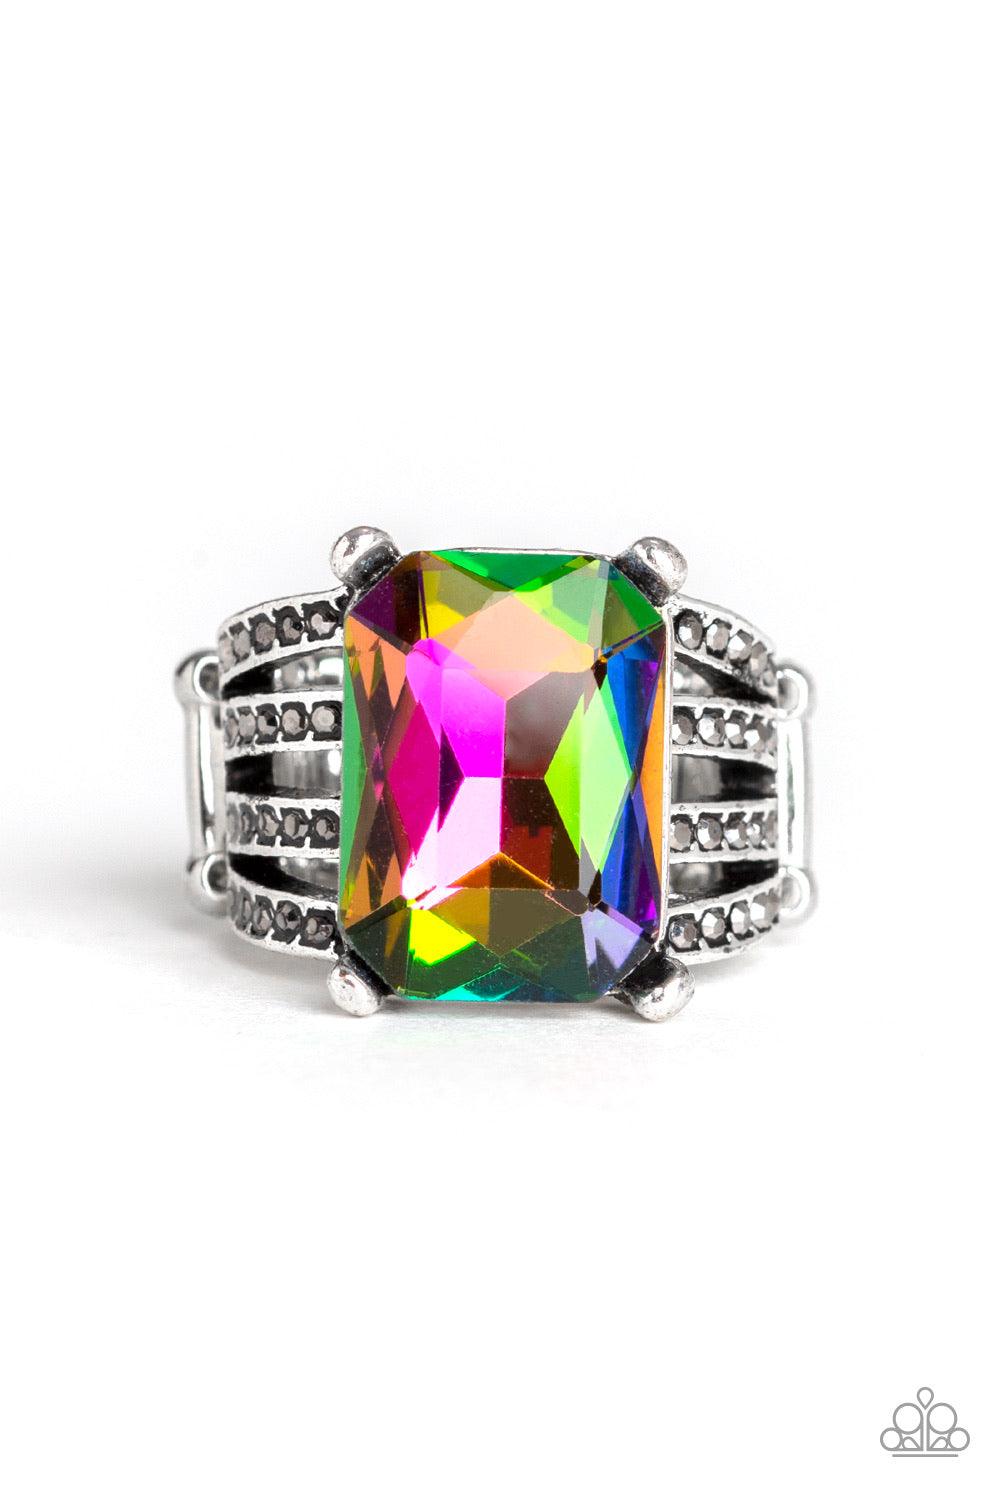 Paparazzi Accessories Expect Heavy REIGN - Multi Featuring a regal emerald style cut, an oversized rainbow gem is pressed into the center of stacked silver bands radiating with dainty hematite rhinestones for a dramatic look. Features a stretchy band for